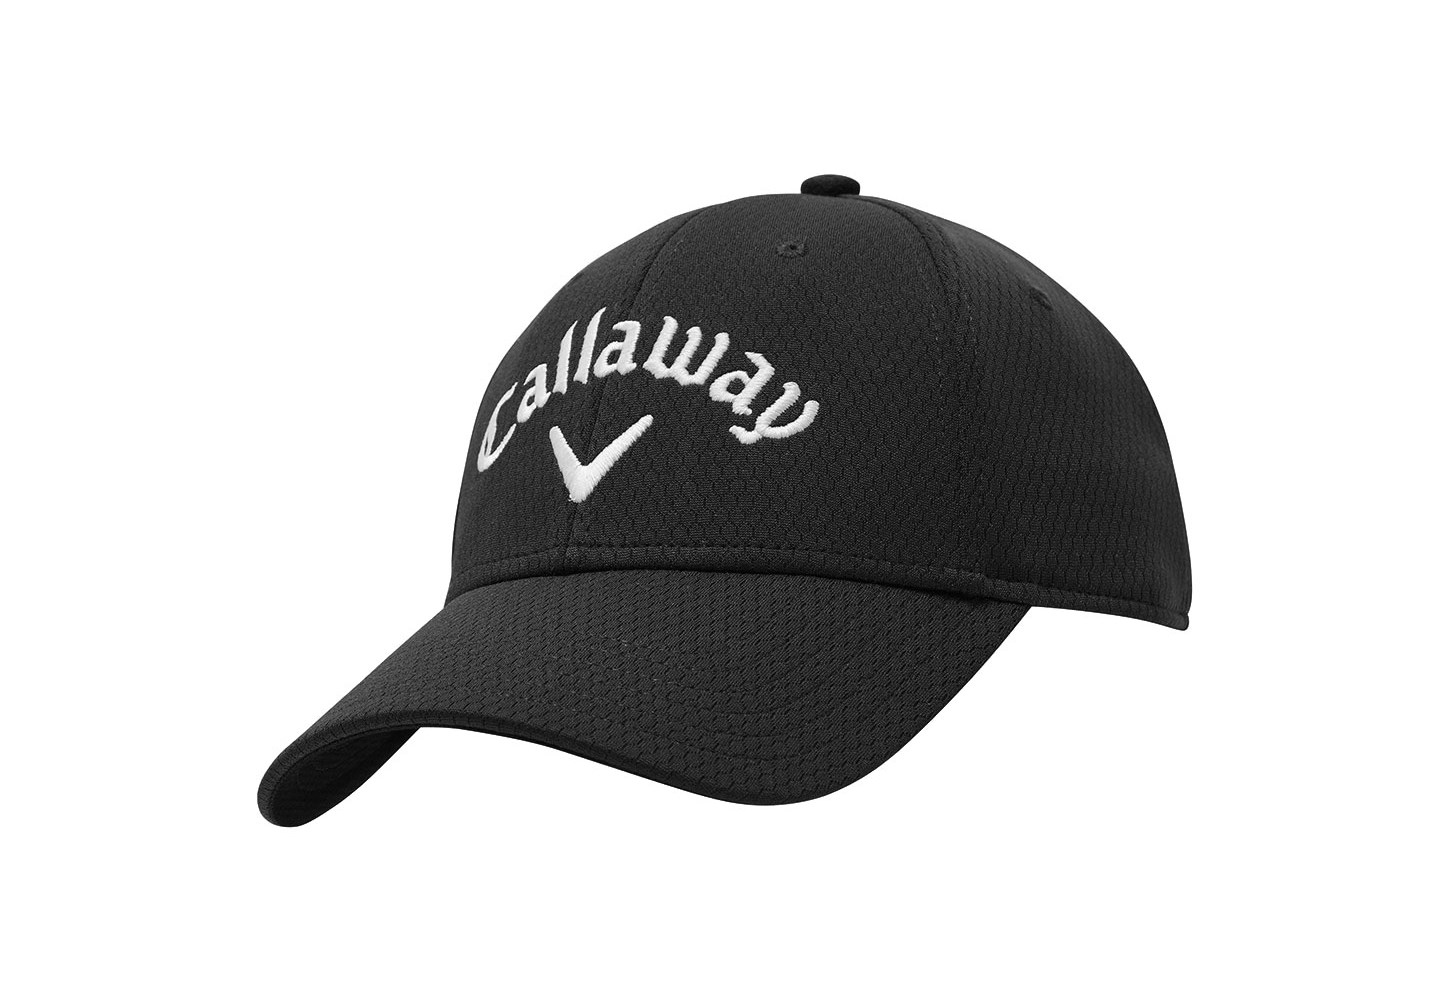 Callaway Ladies Side Crested Structured Cap - Golfonline